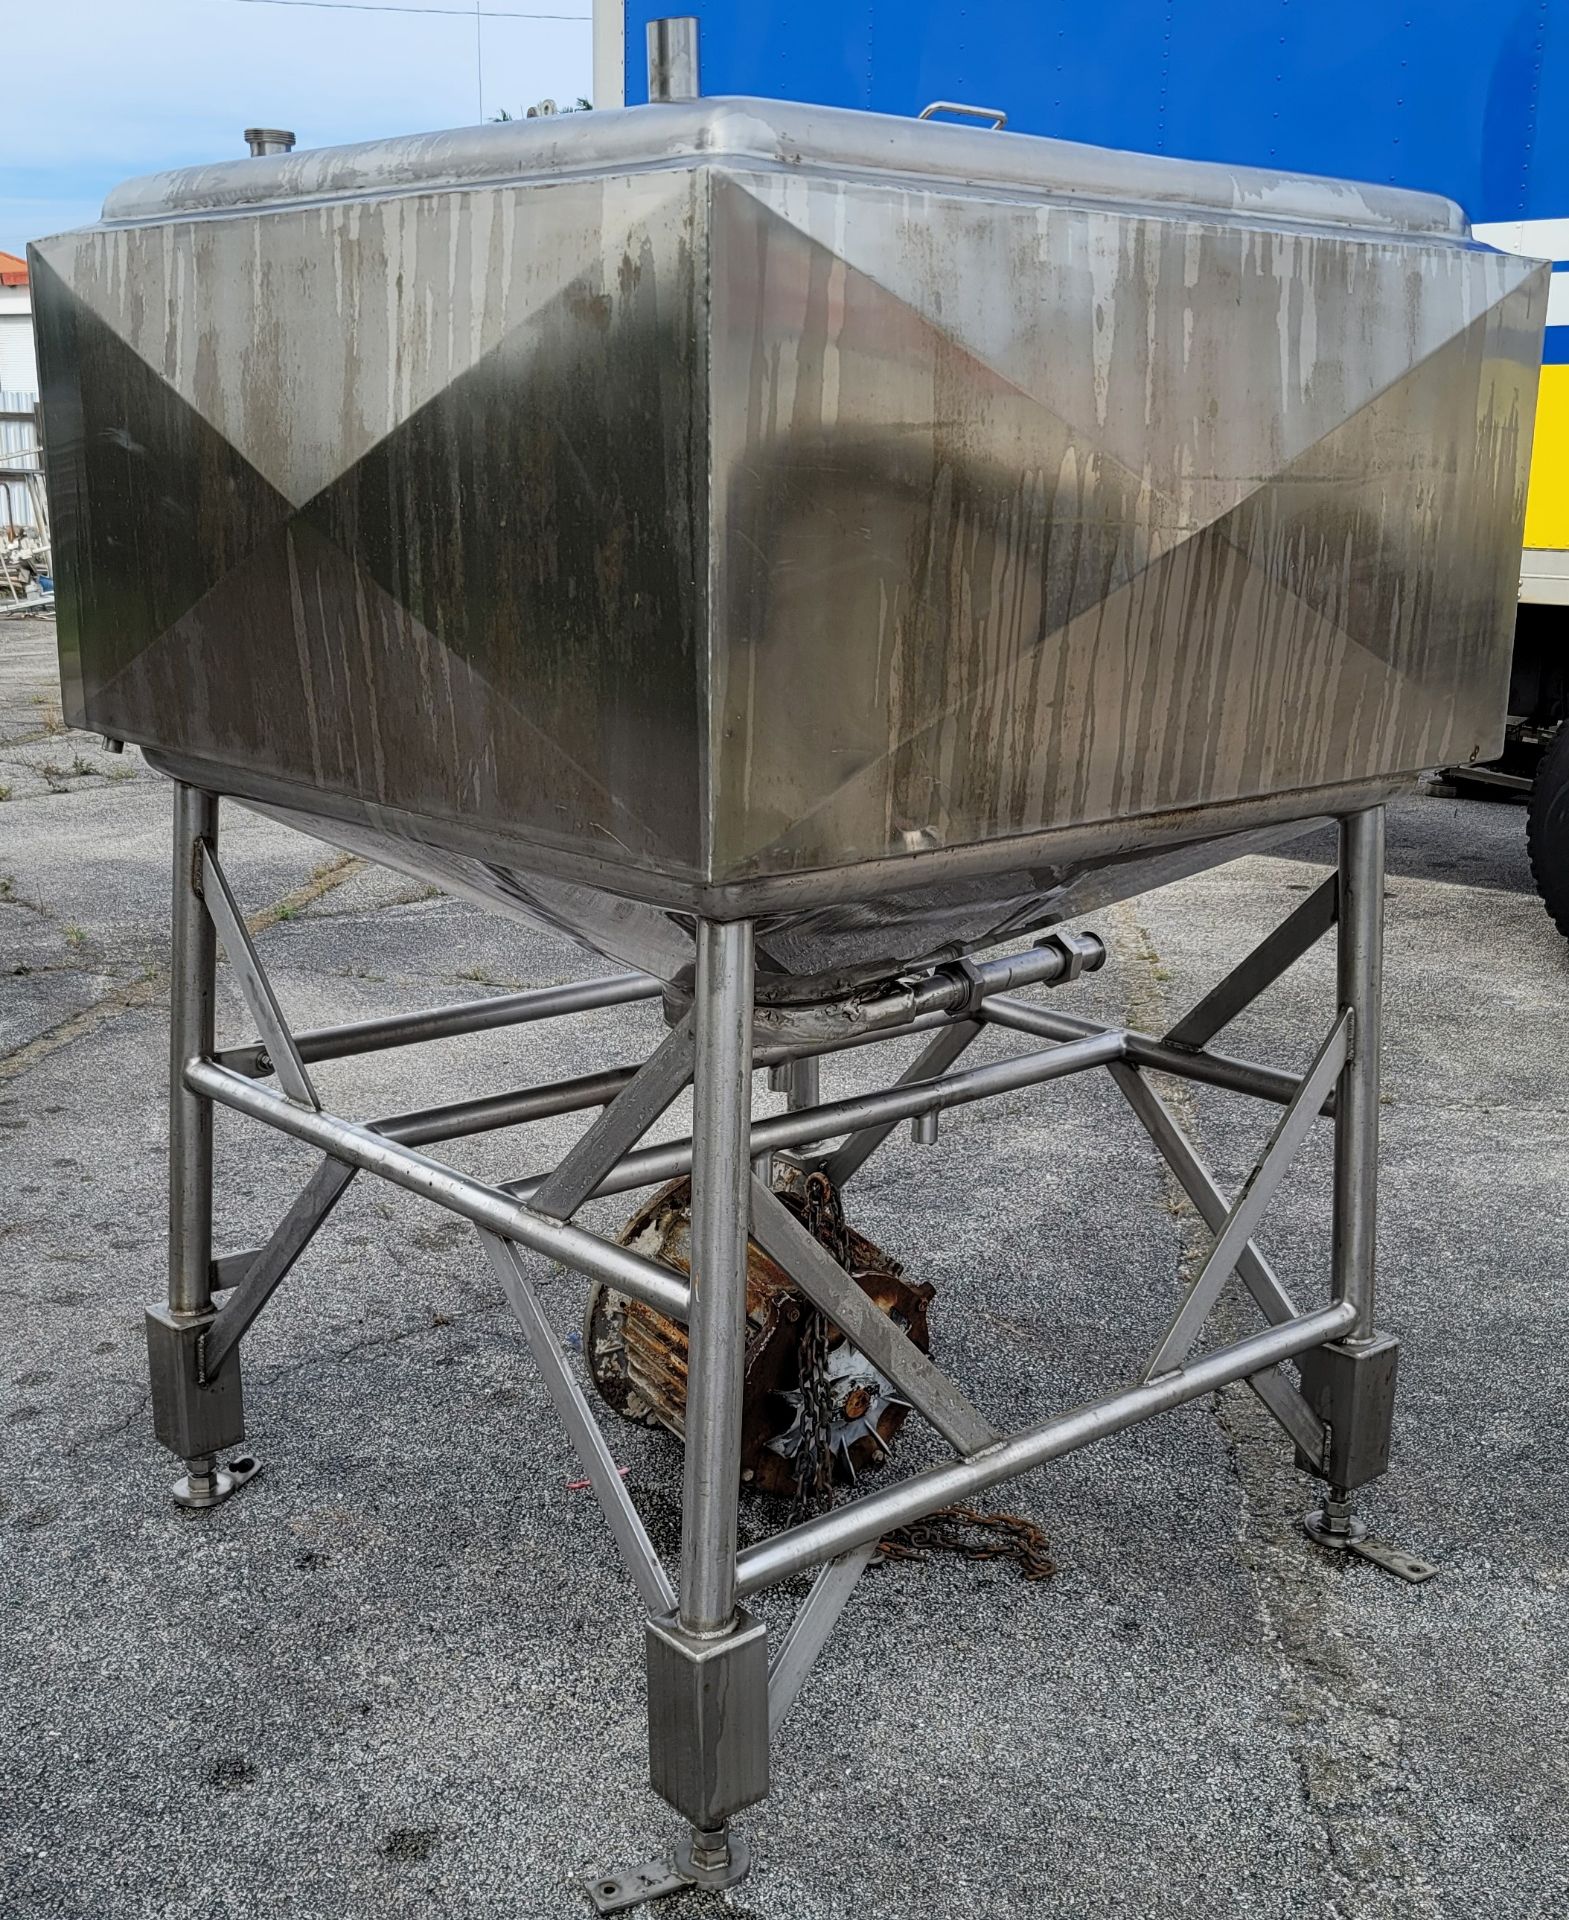 (Located in Belle Glade, FL) BREDDO 250GAL JACKETED LIQUIFIER, SERIAL: 05-591-AD, Rigging/Loading